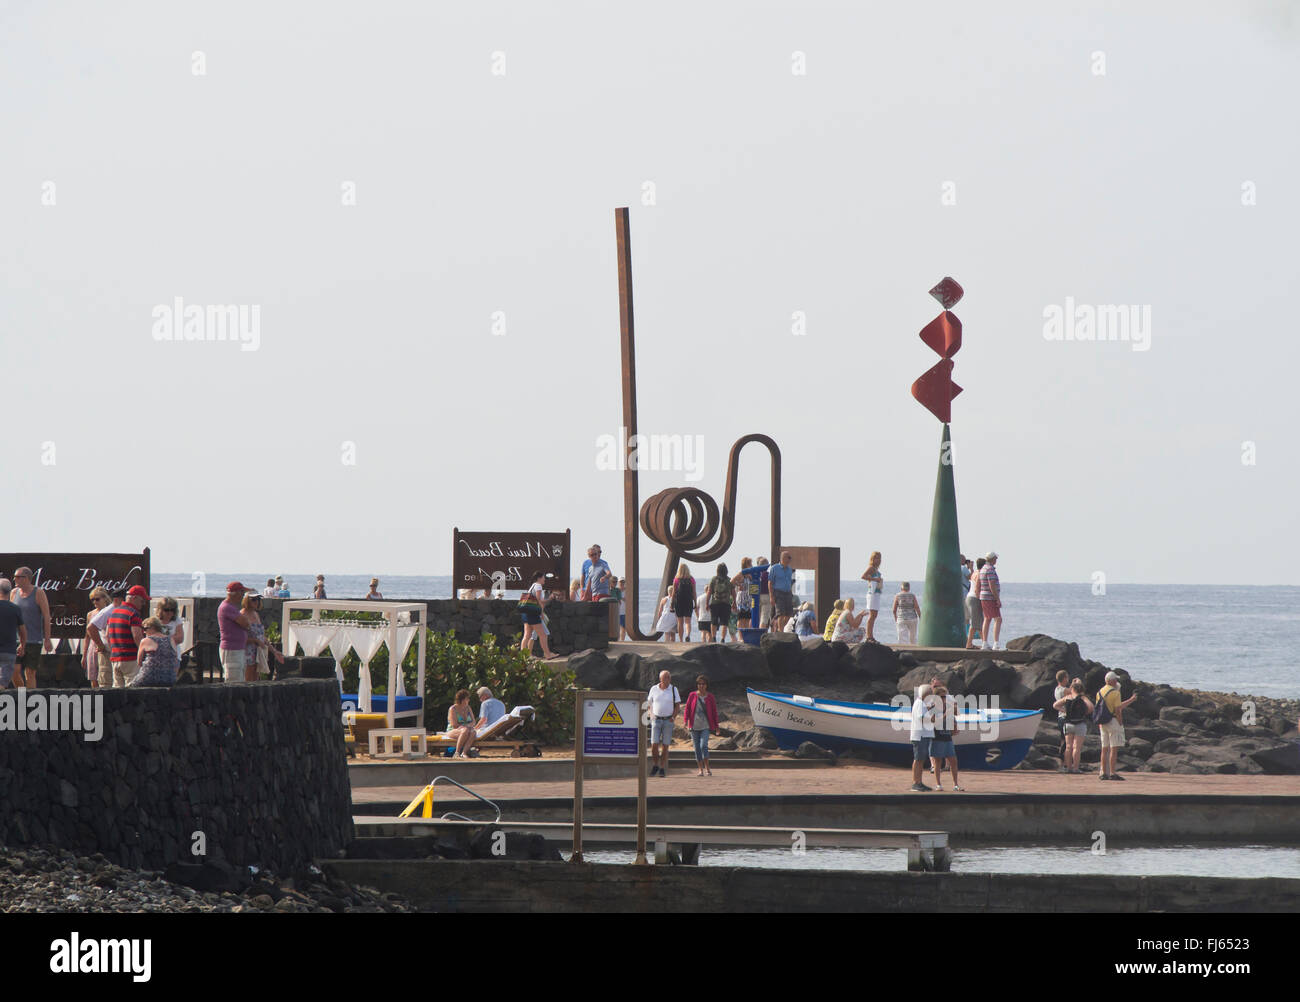 Seaside promenade in Plays las Americas, Tenerife Canary Islands Spain, tourists enjoying a morning walk and art installations Stock Photo